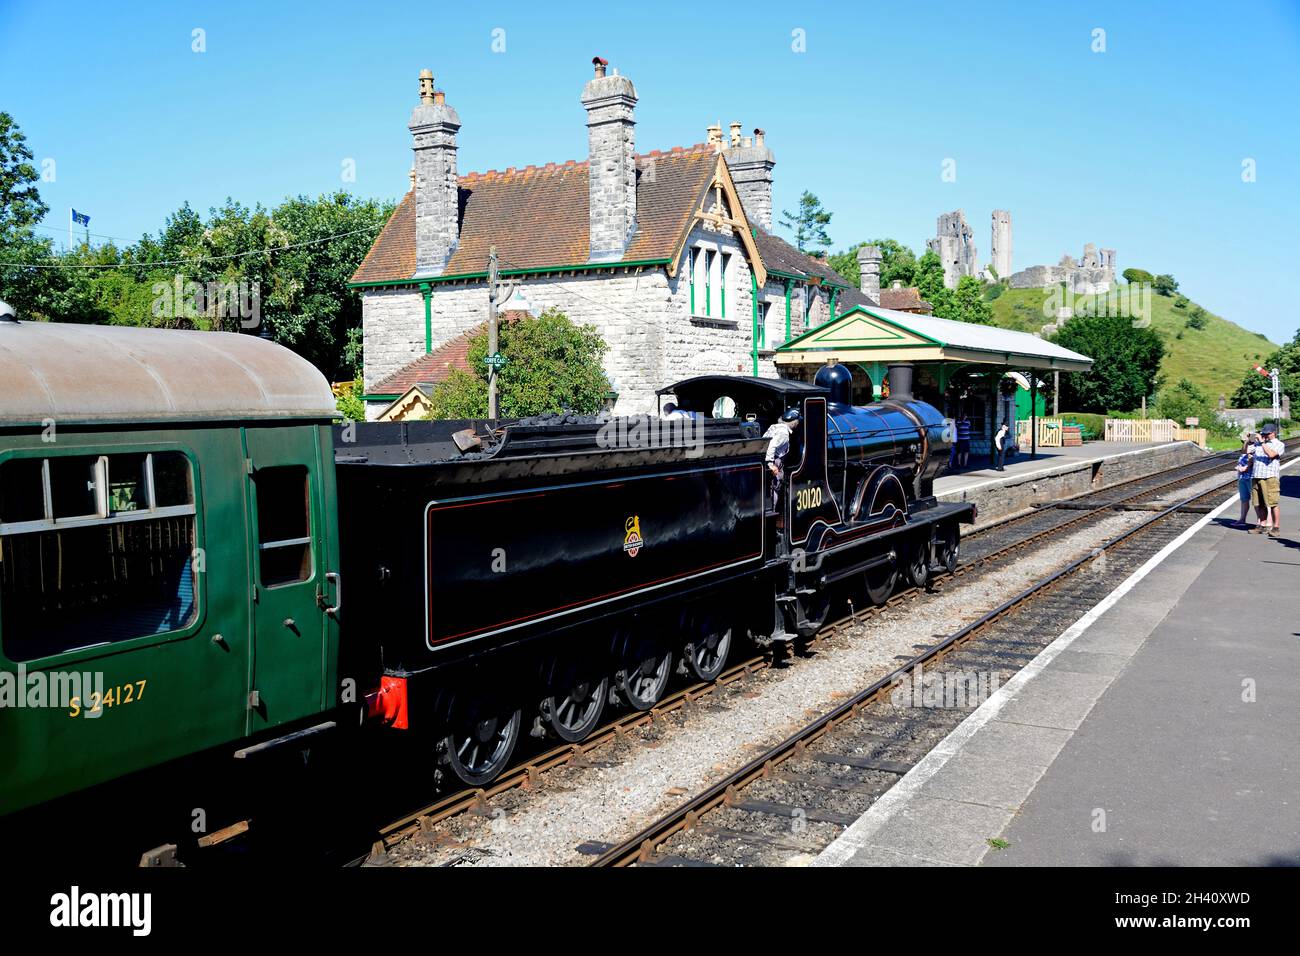 LSWR T9 Class 4-4-0 steam train entering the railway station with the castle to the rear, Corfe, Dorset, England, UK, Western Europe. Stock Photo